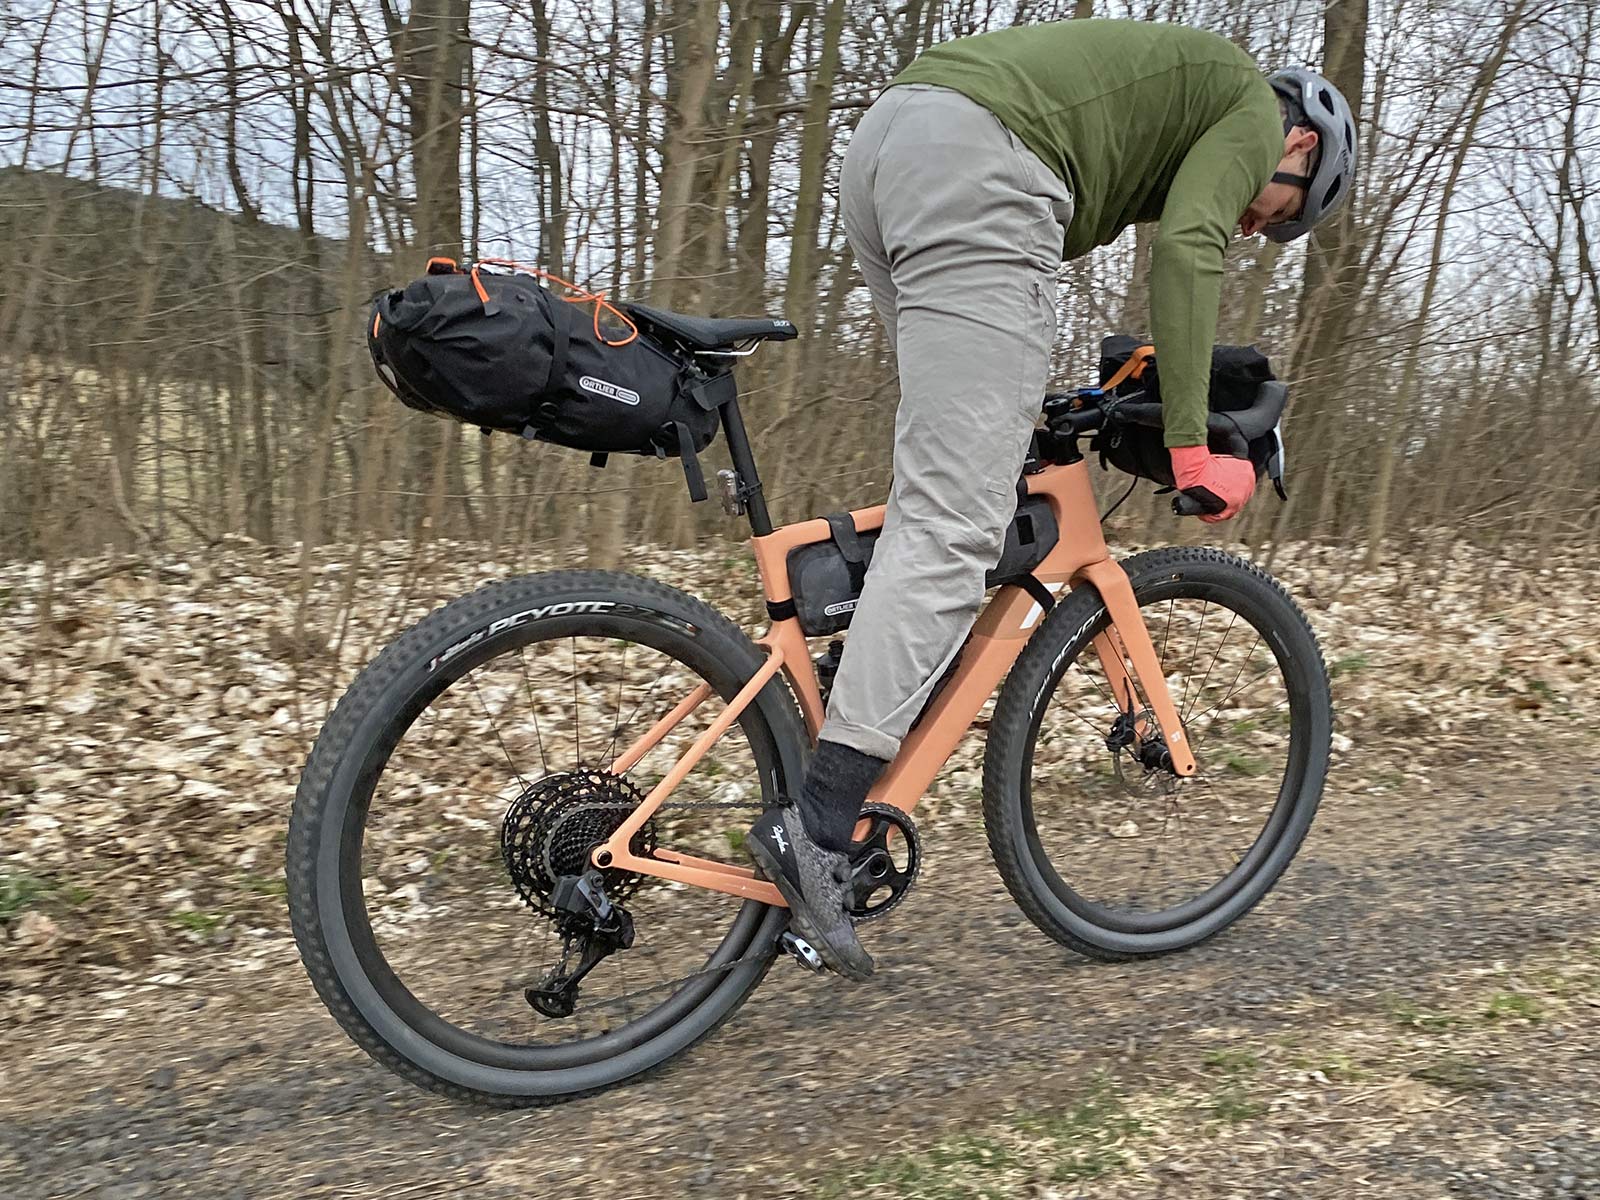 Ortlieb Seat-Pack QR, off-road secure quick-release bikepacking saddlebag Review, riding